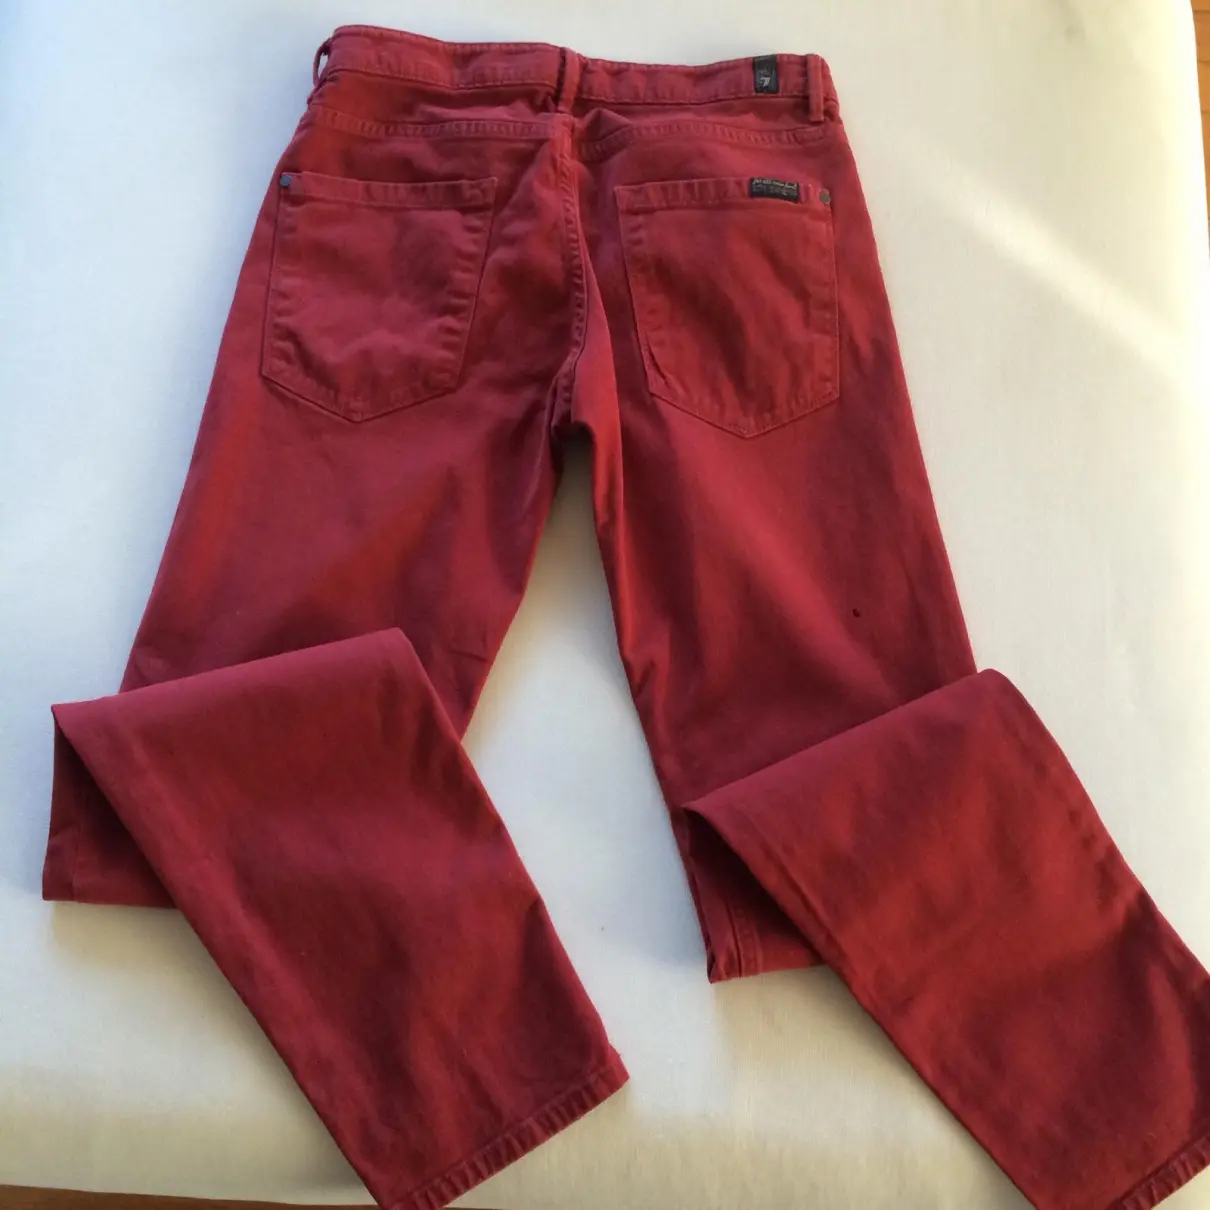 Buy 7 For All Mankind Red Cotton Jeans online